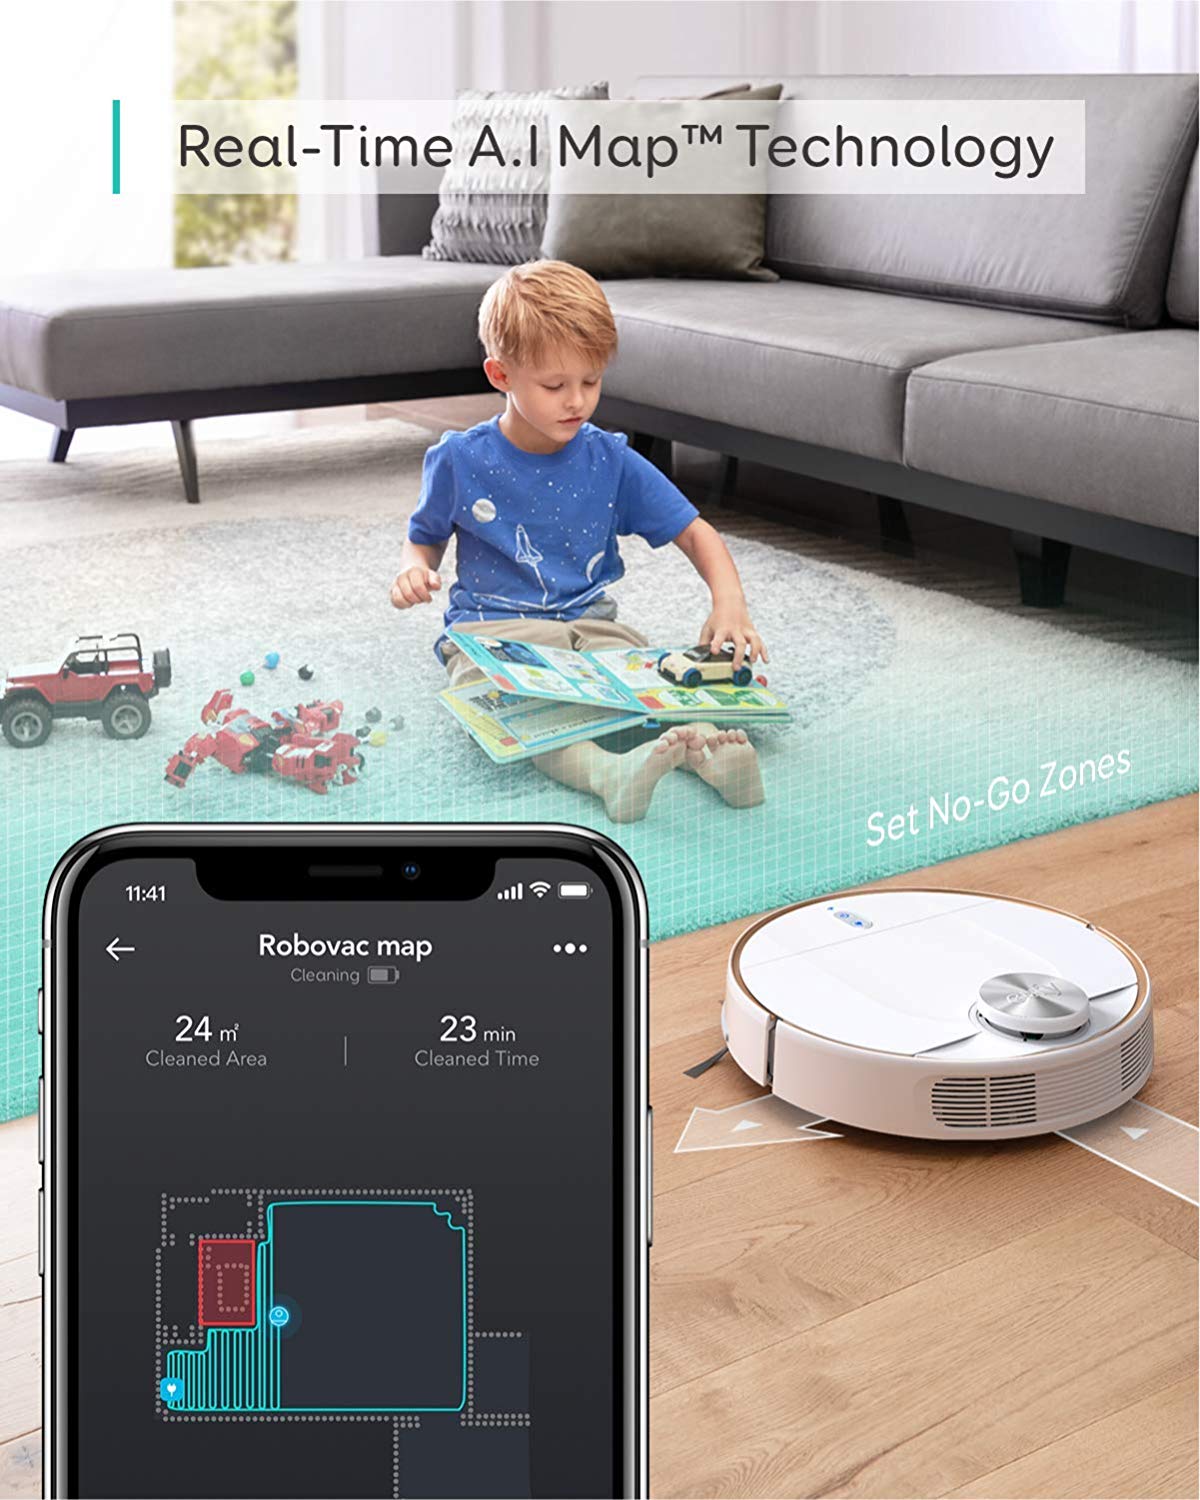 Eufy iPhone Controlled Robot Vacuum On Sale for $170 Off [Deal]